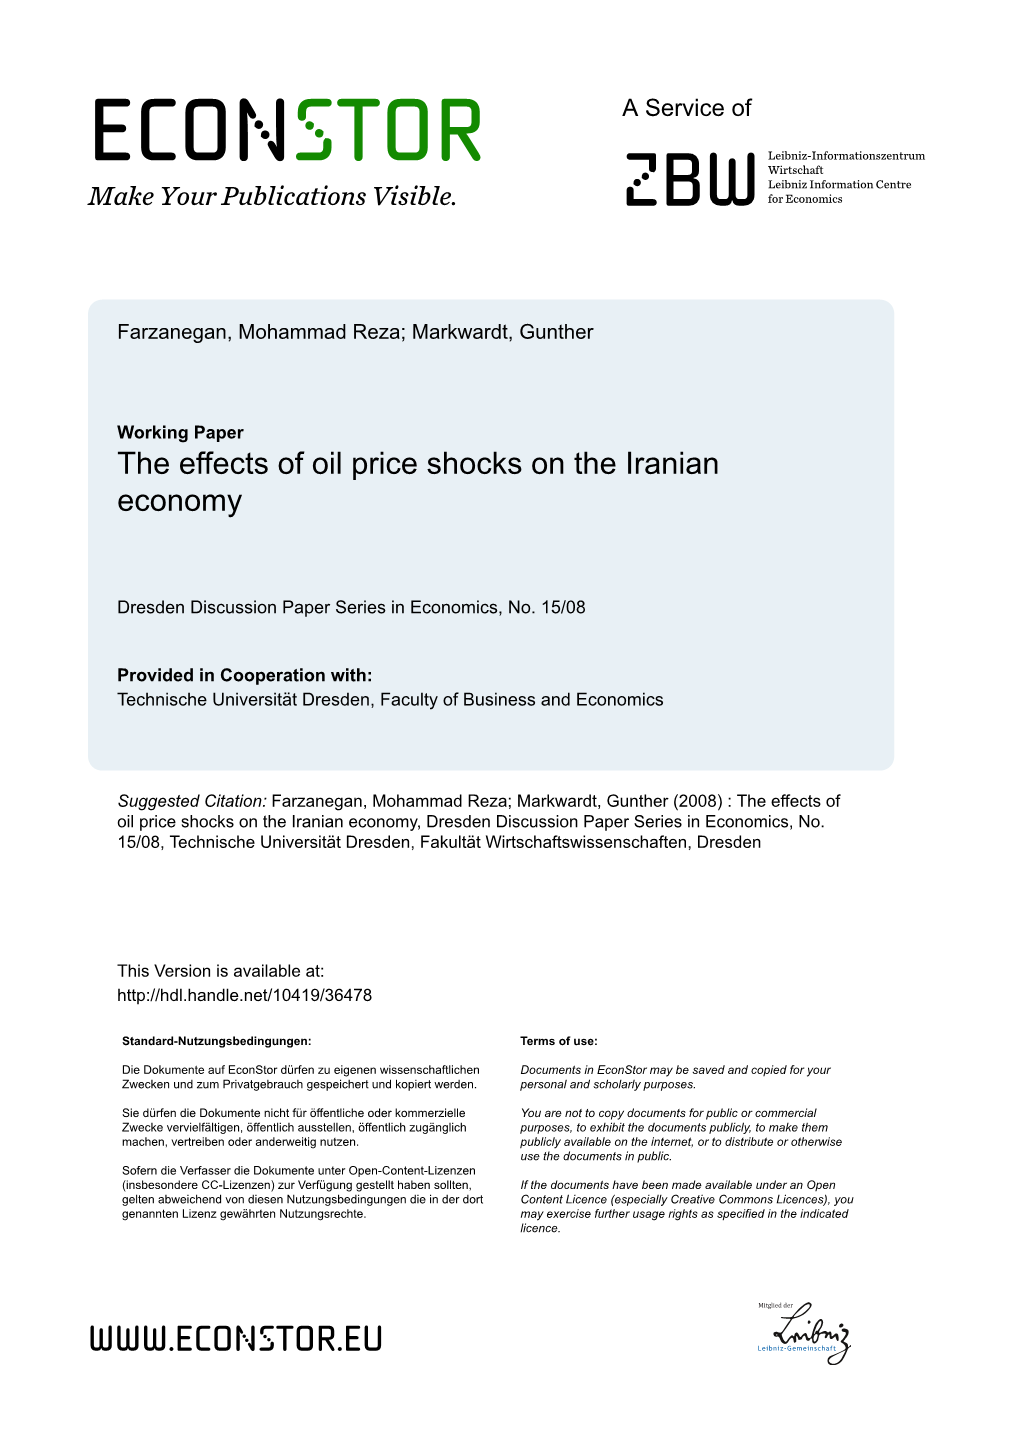 The Effects of Oil Price Shocks on the Iranian Economy